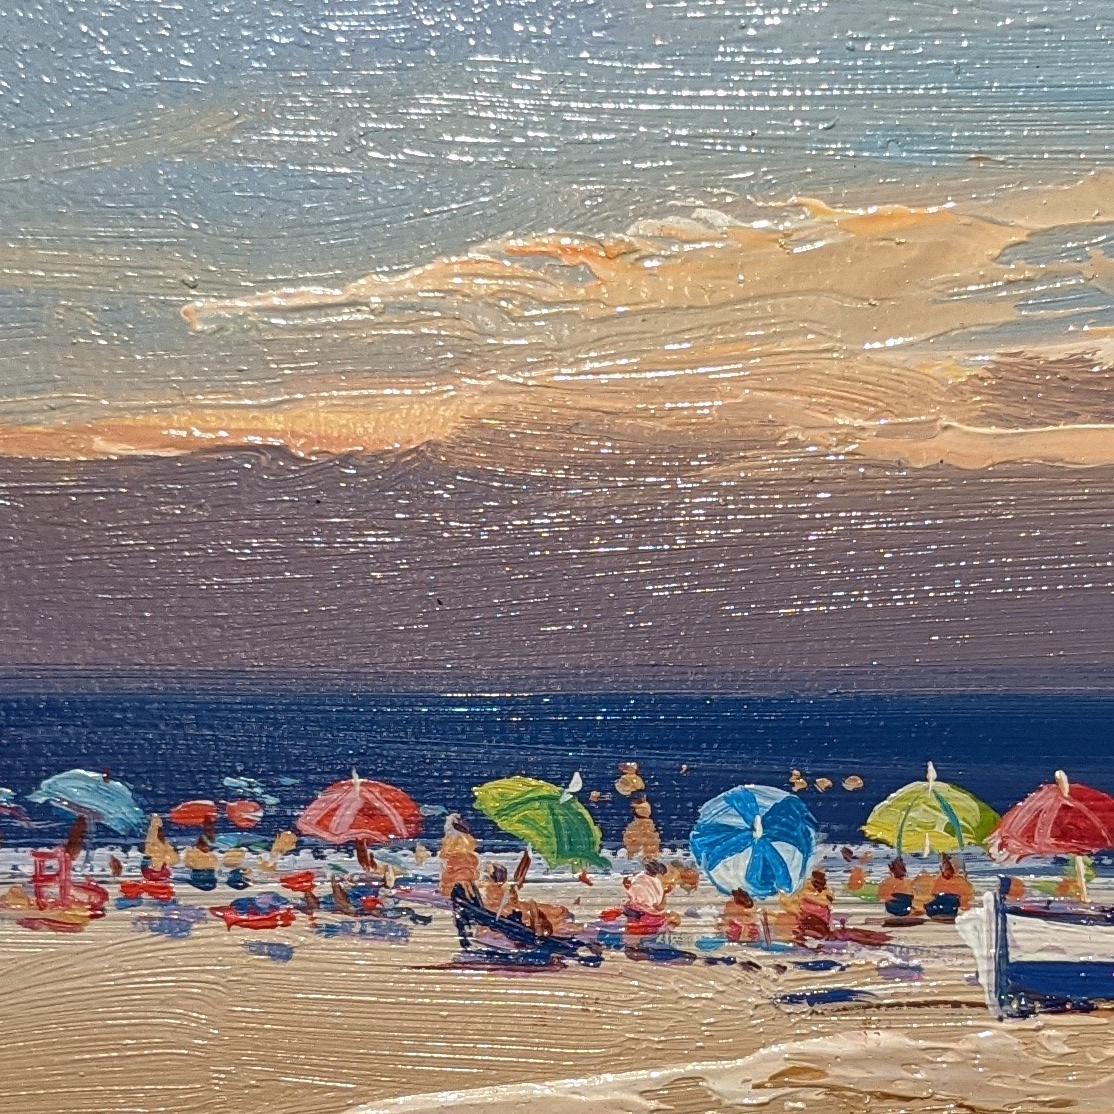 A warm and beautiful contemporary beach scene 'Candy Parasols' by E. Martinez. This stunning seascape has a soft and natural colour palette, pale blues and earthy cool tones are subtle and mellow. Interesting textures create a warm and balanced